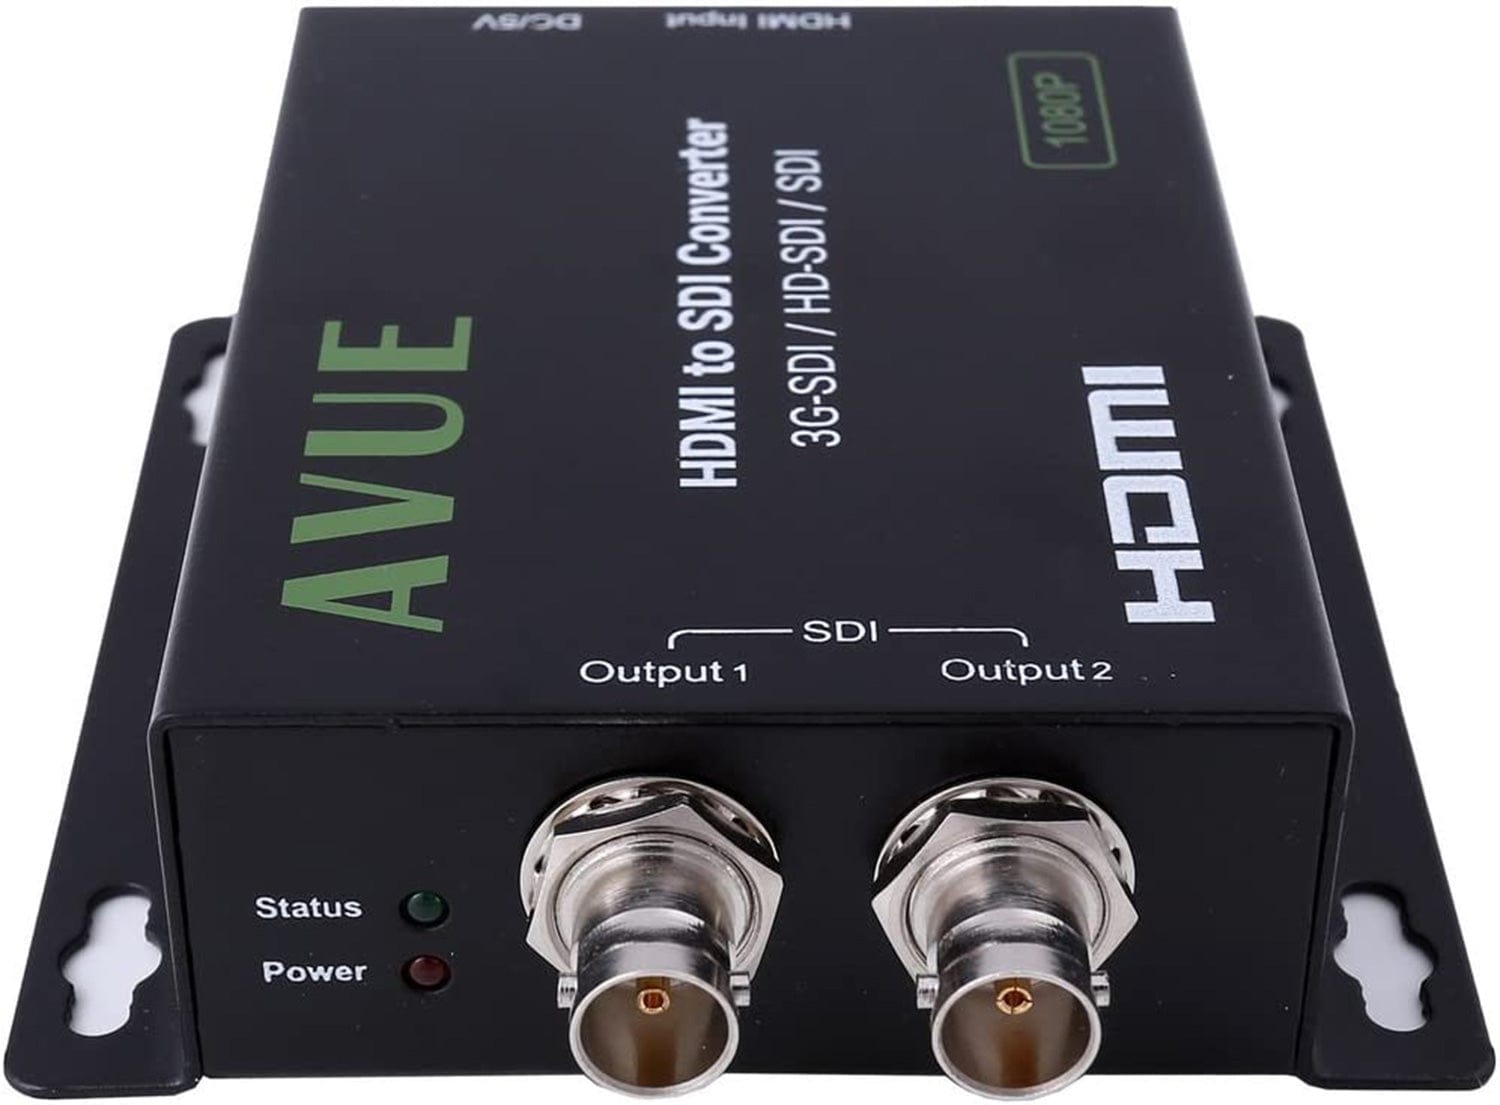 Avue SDH-T01 HDMI to SDI Converter - PSSL ProSound and Stage Lighting